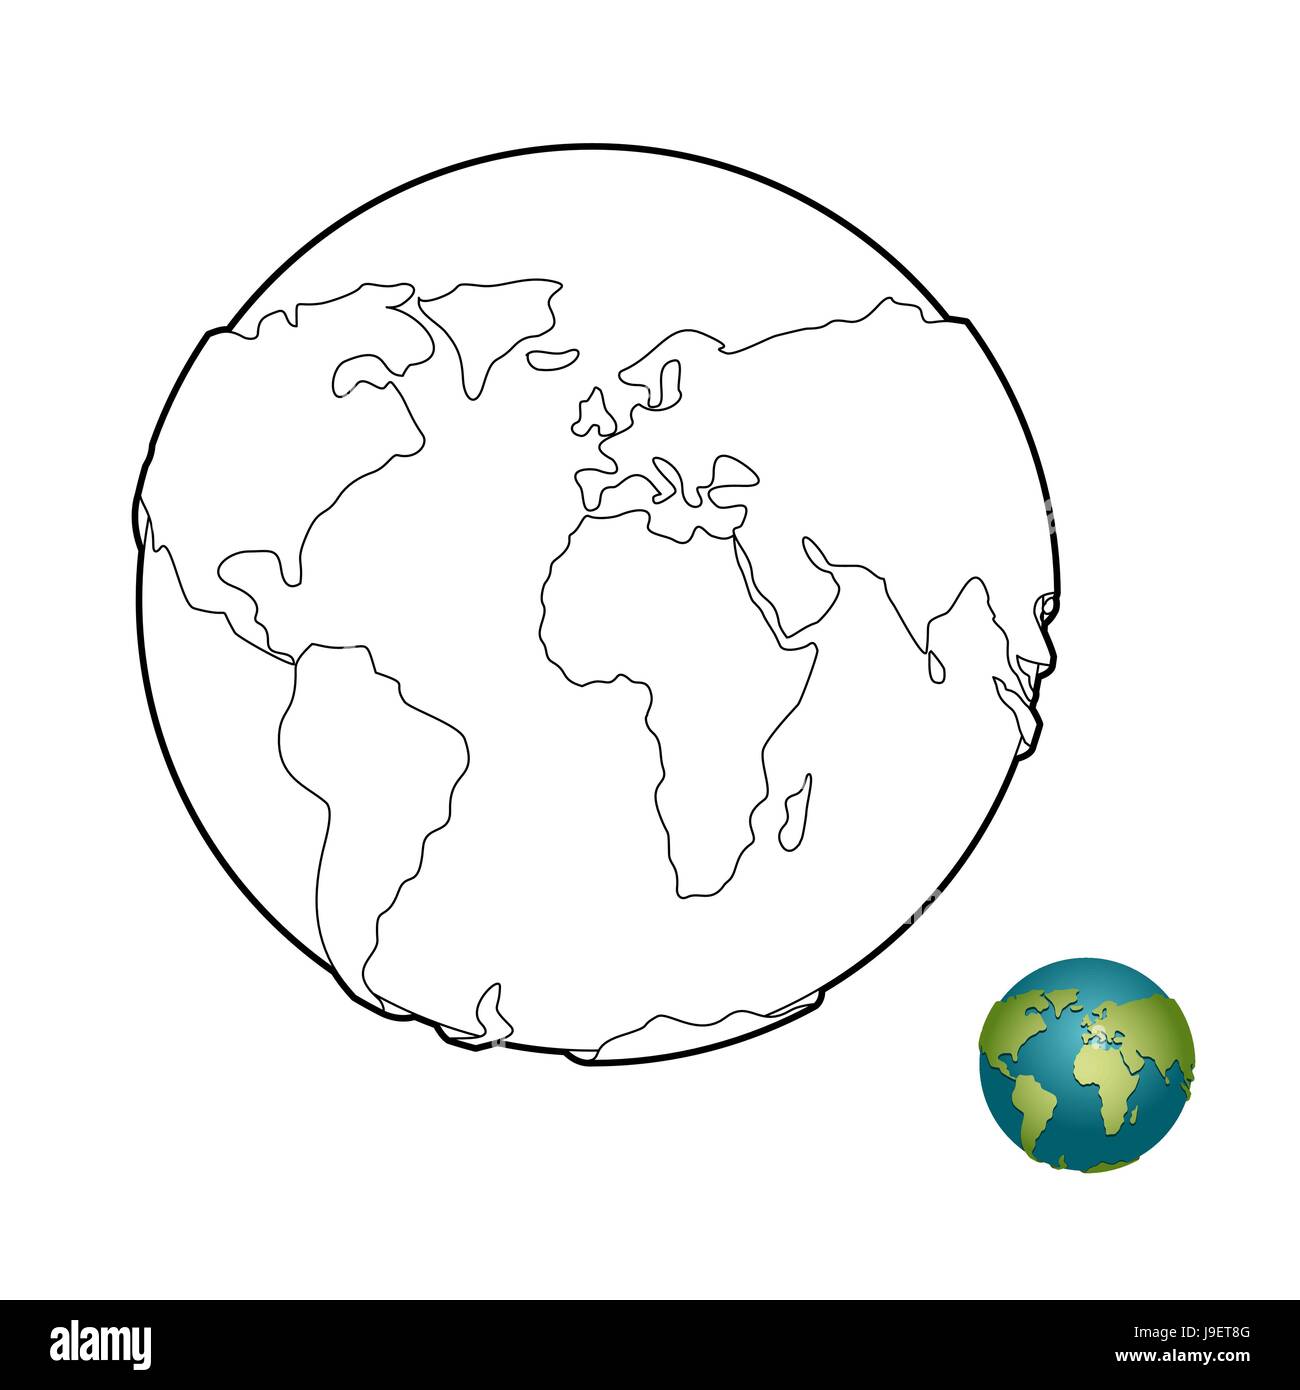 Earth coloring book. Heavenly body. Planet with mainlands. Globe ...